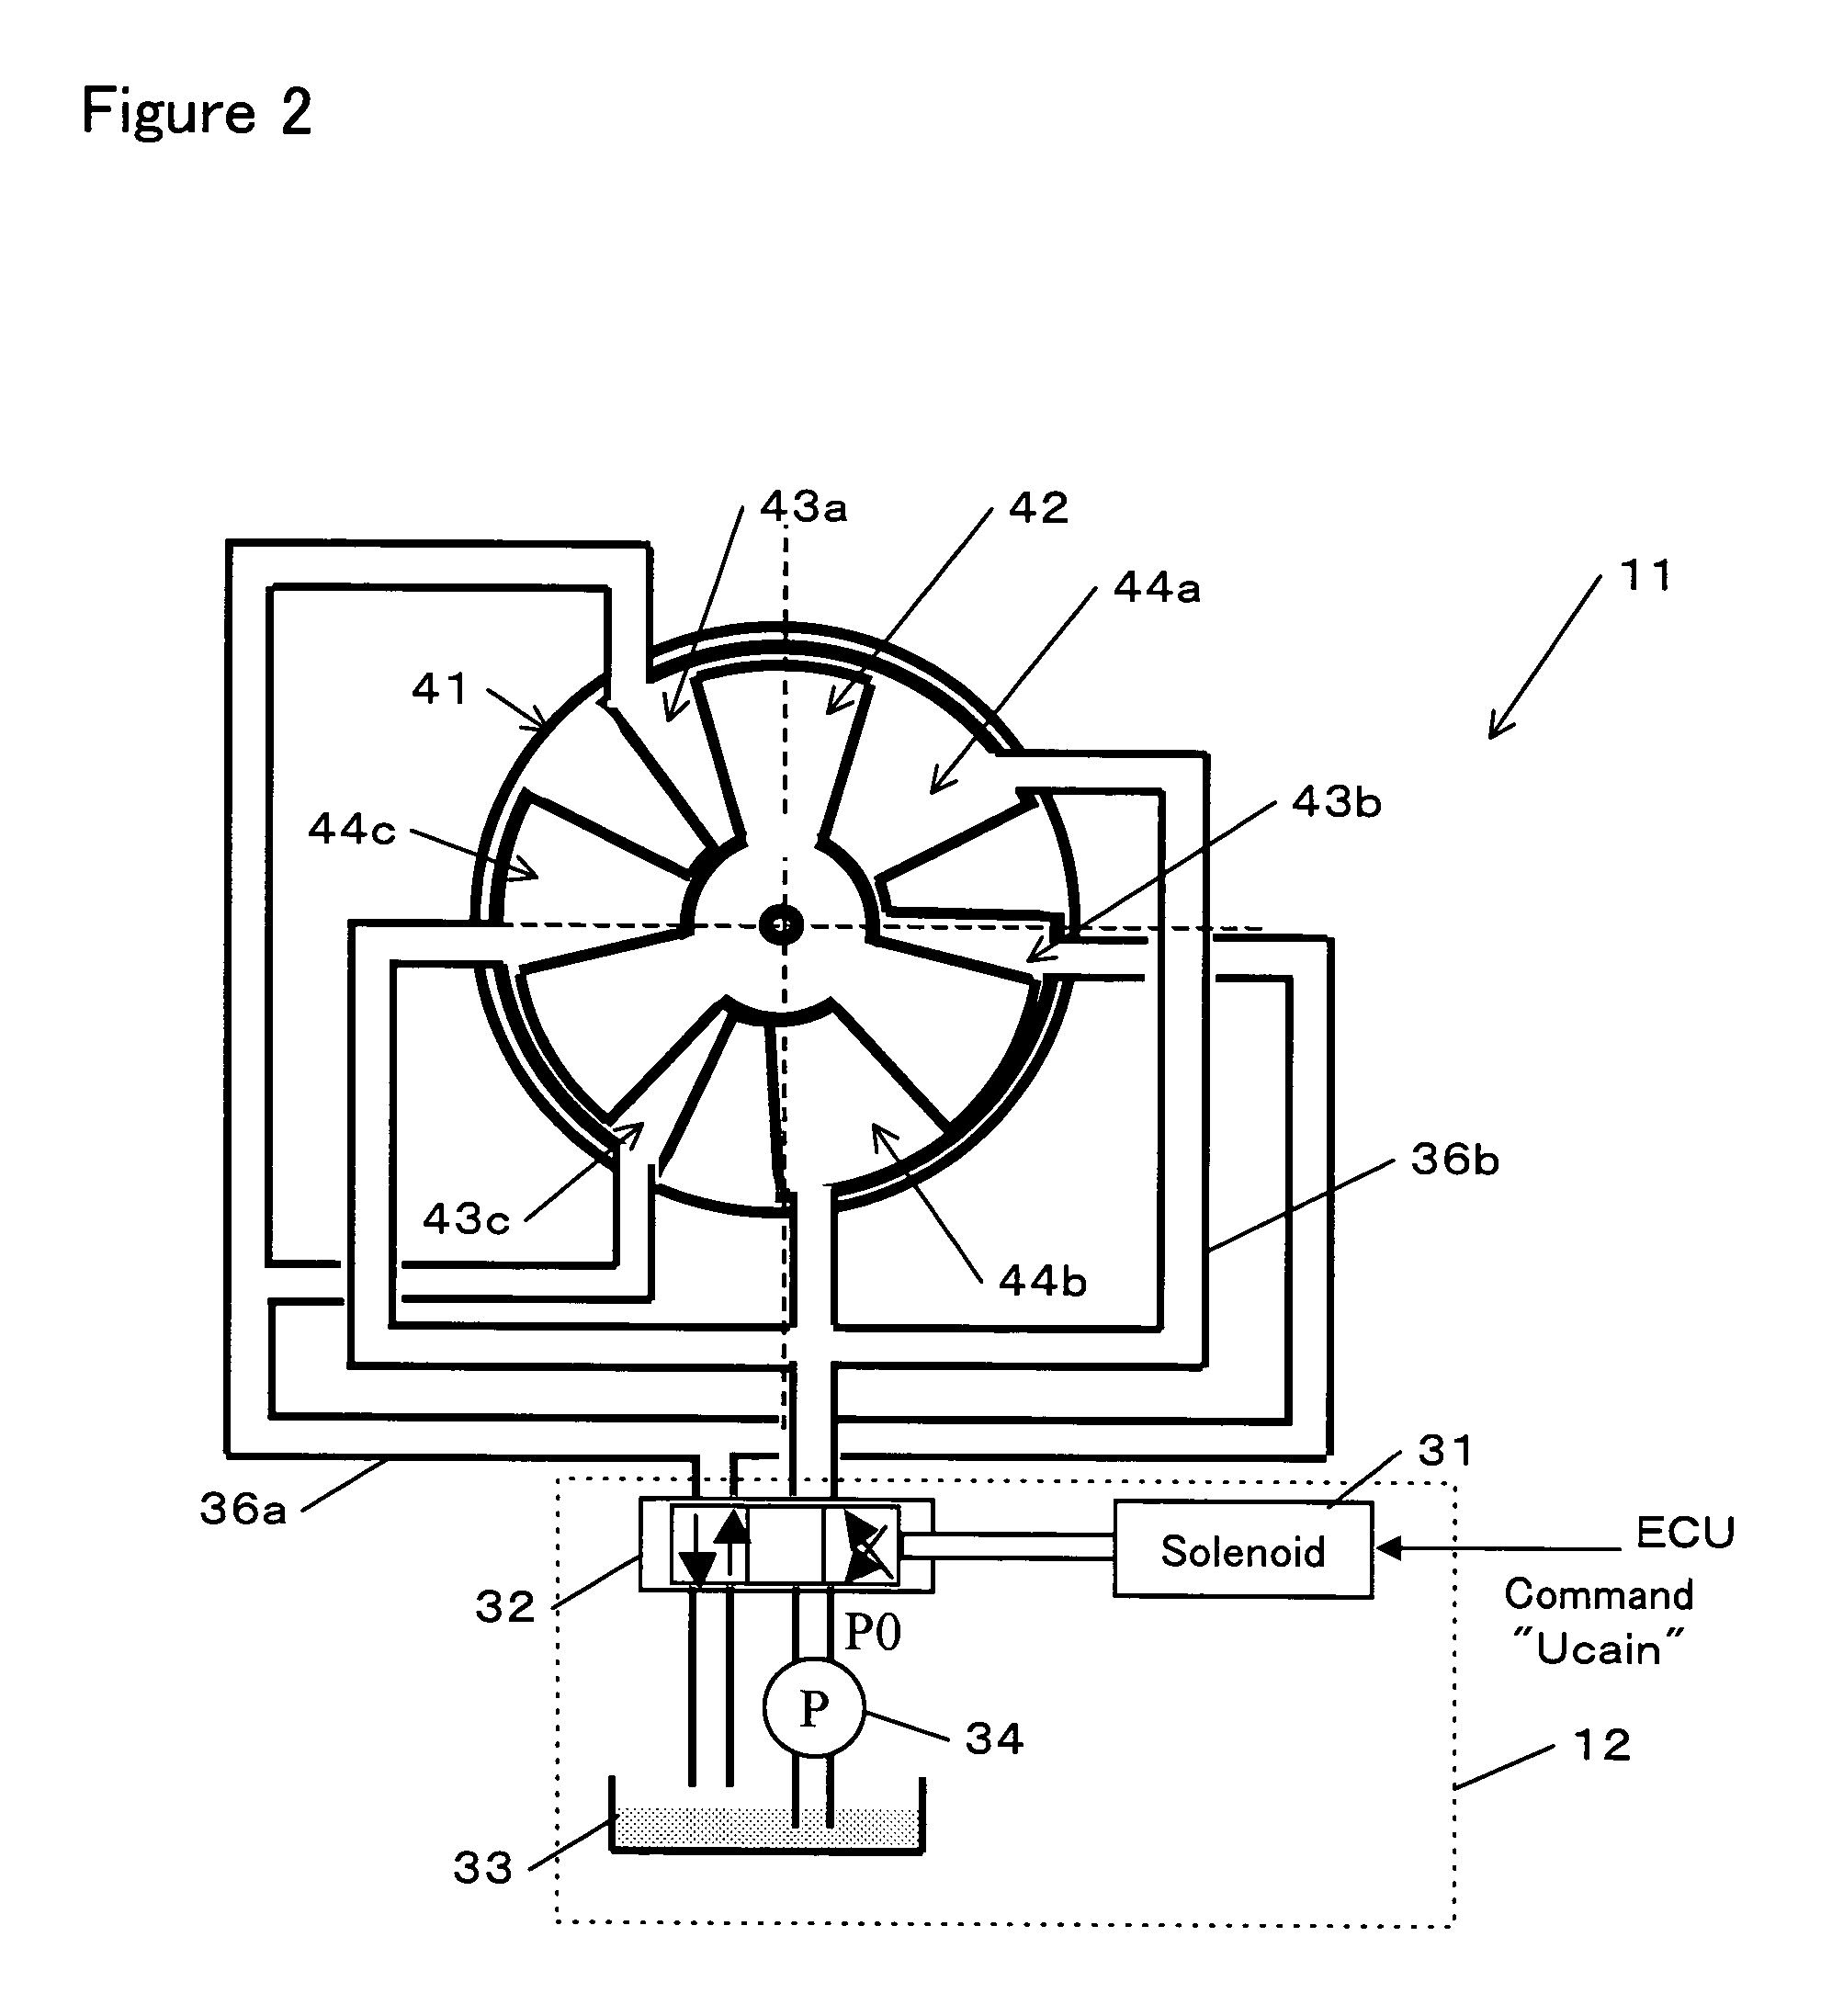 Control apparatus for controlling a plant by using a delta-sigma modulation